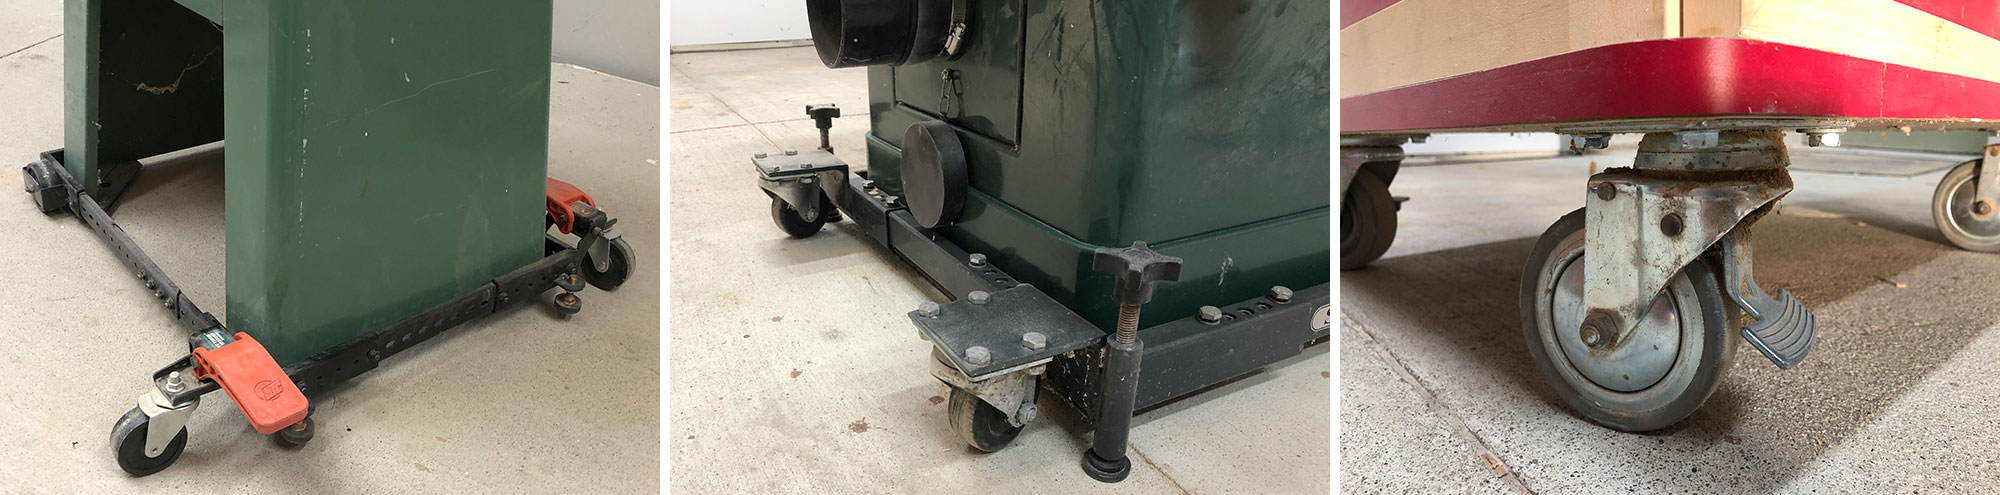 Image 1 & 2: Mobile machine base in-use. Image 3: Caster with brake.